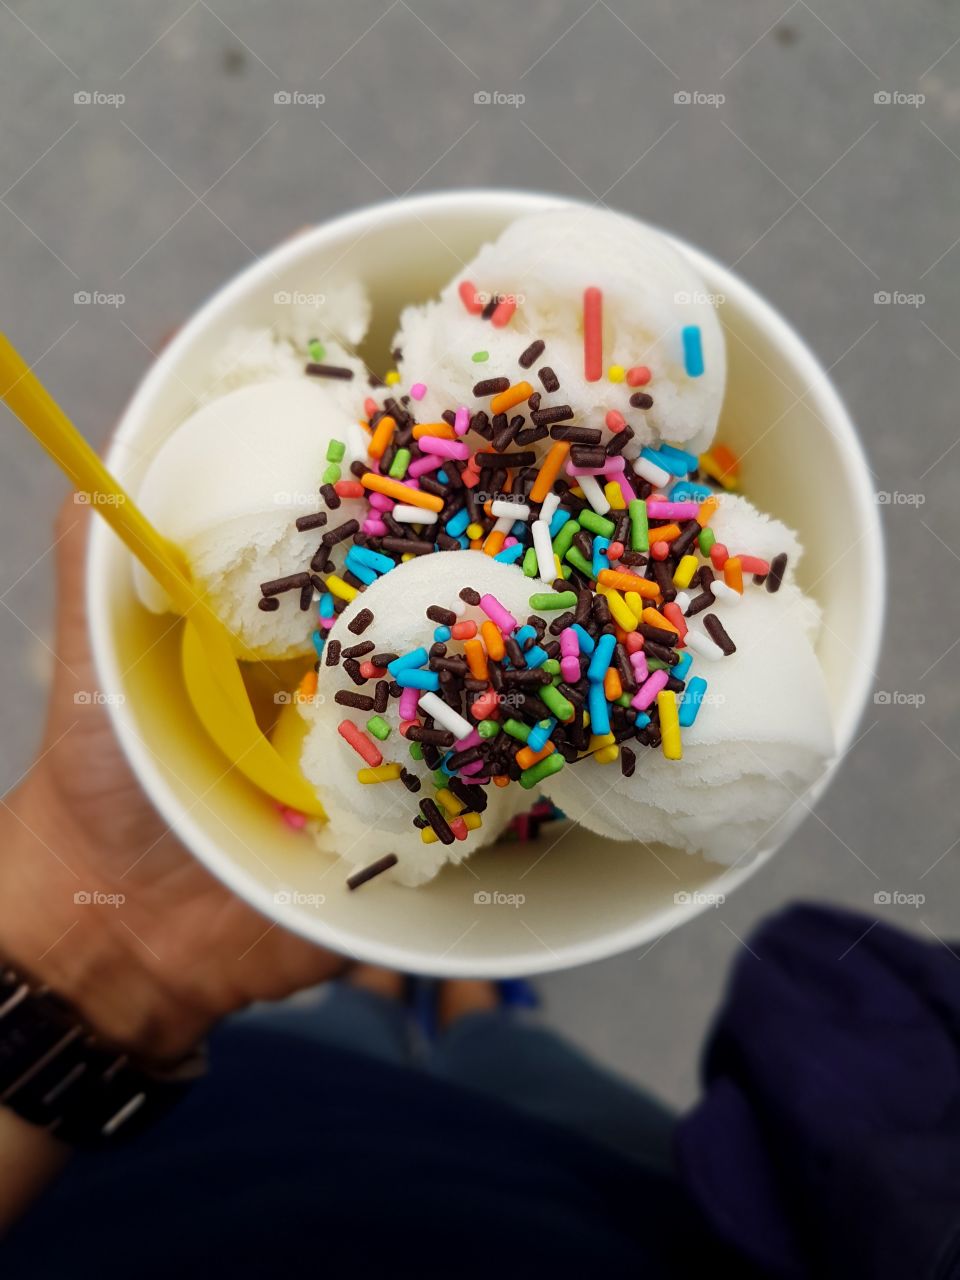 Coconut ice cream with colourful sprinkles